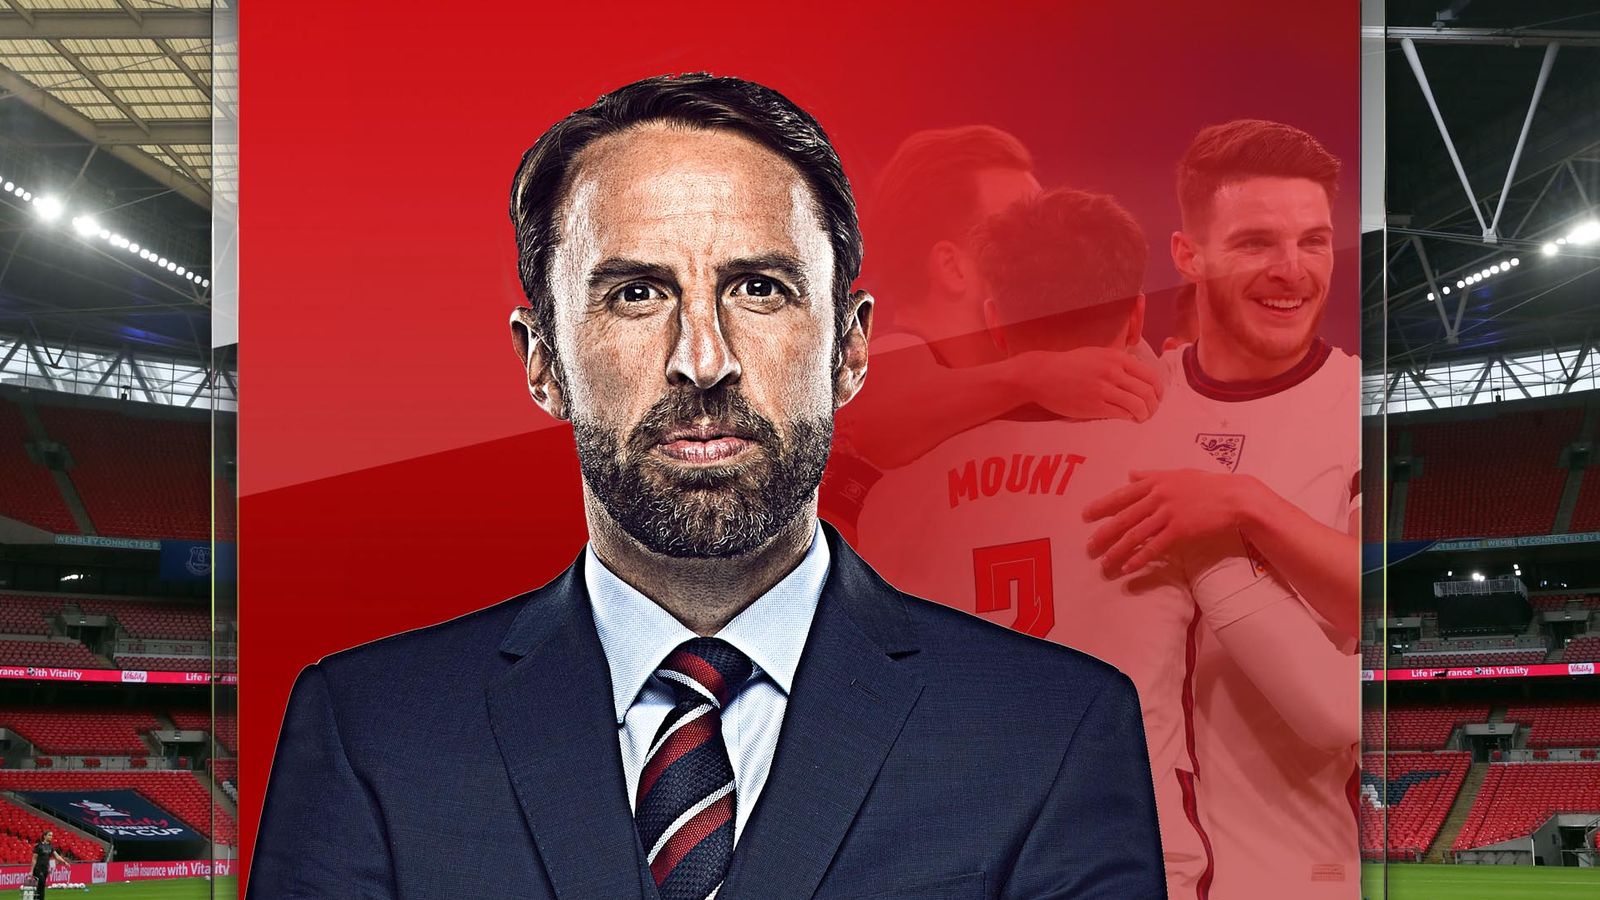 Andorra vs England: Gareth Southgate makes the difference as Three Lions move closer to 2022 World Cup in Qatar